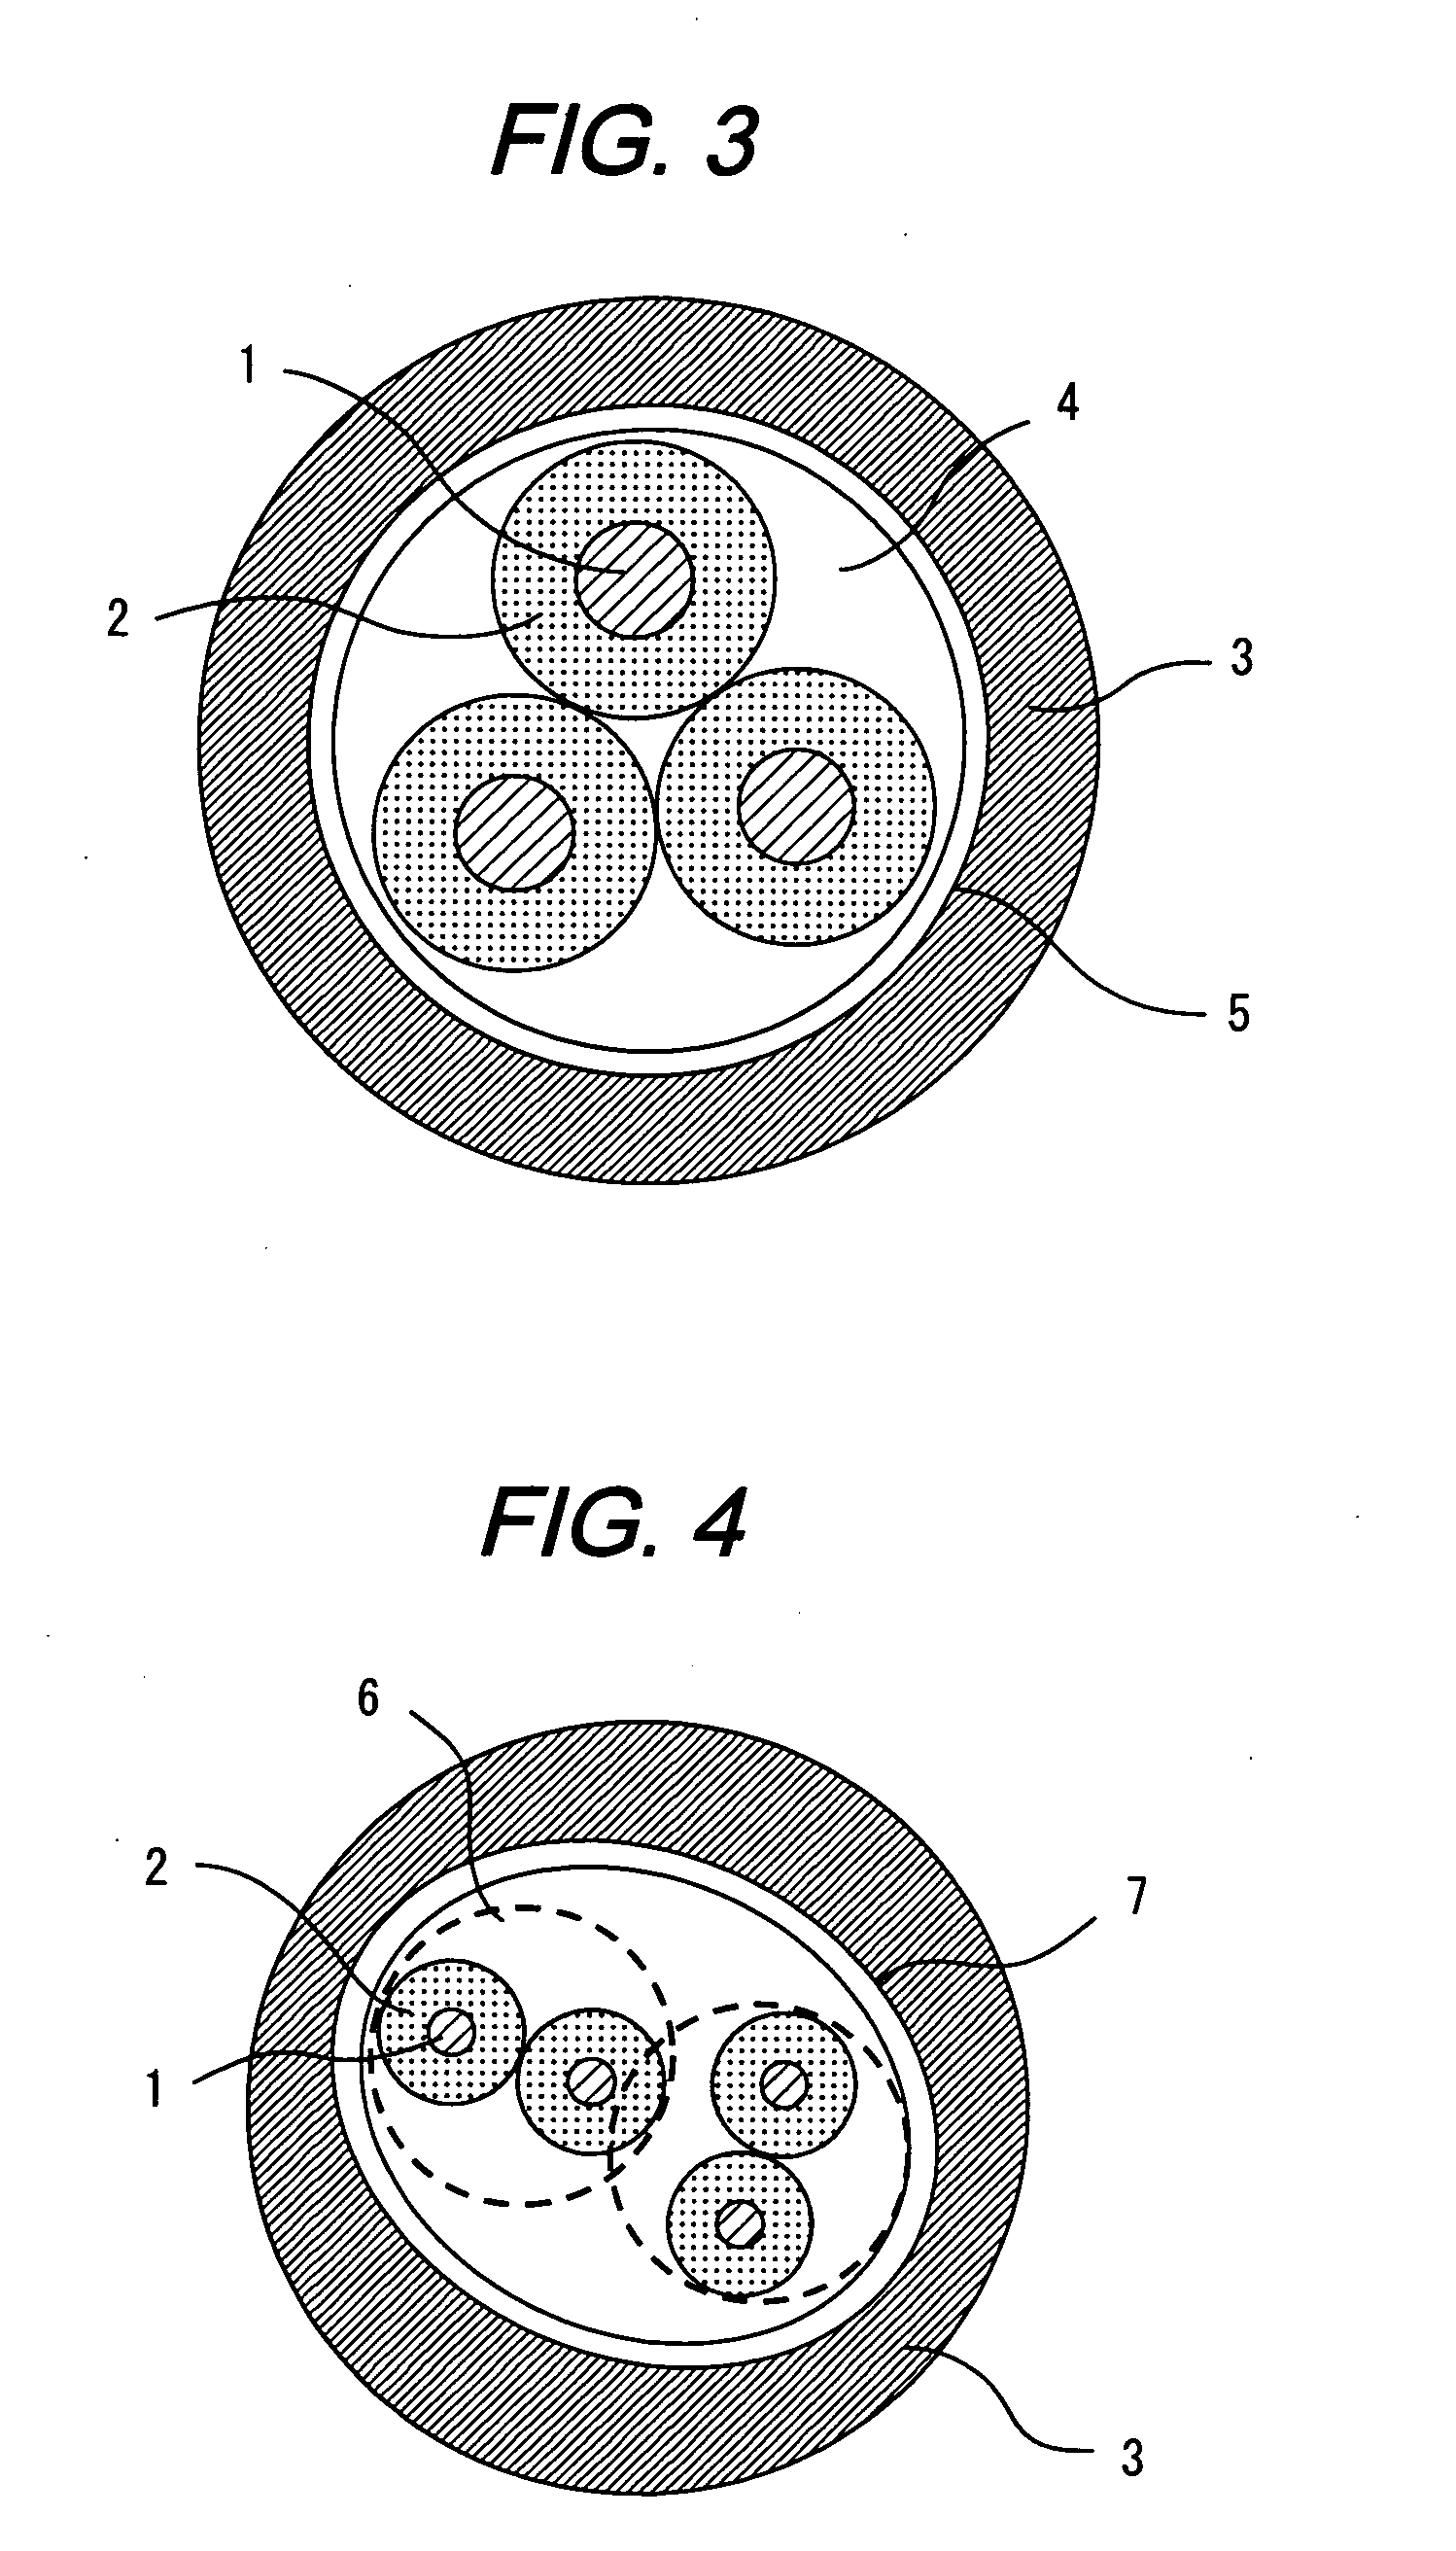 Radiation-resistant non-halogen flame-retardant resin composition as well as electric wire and cable using same